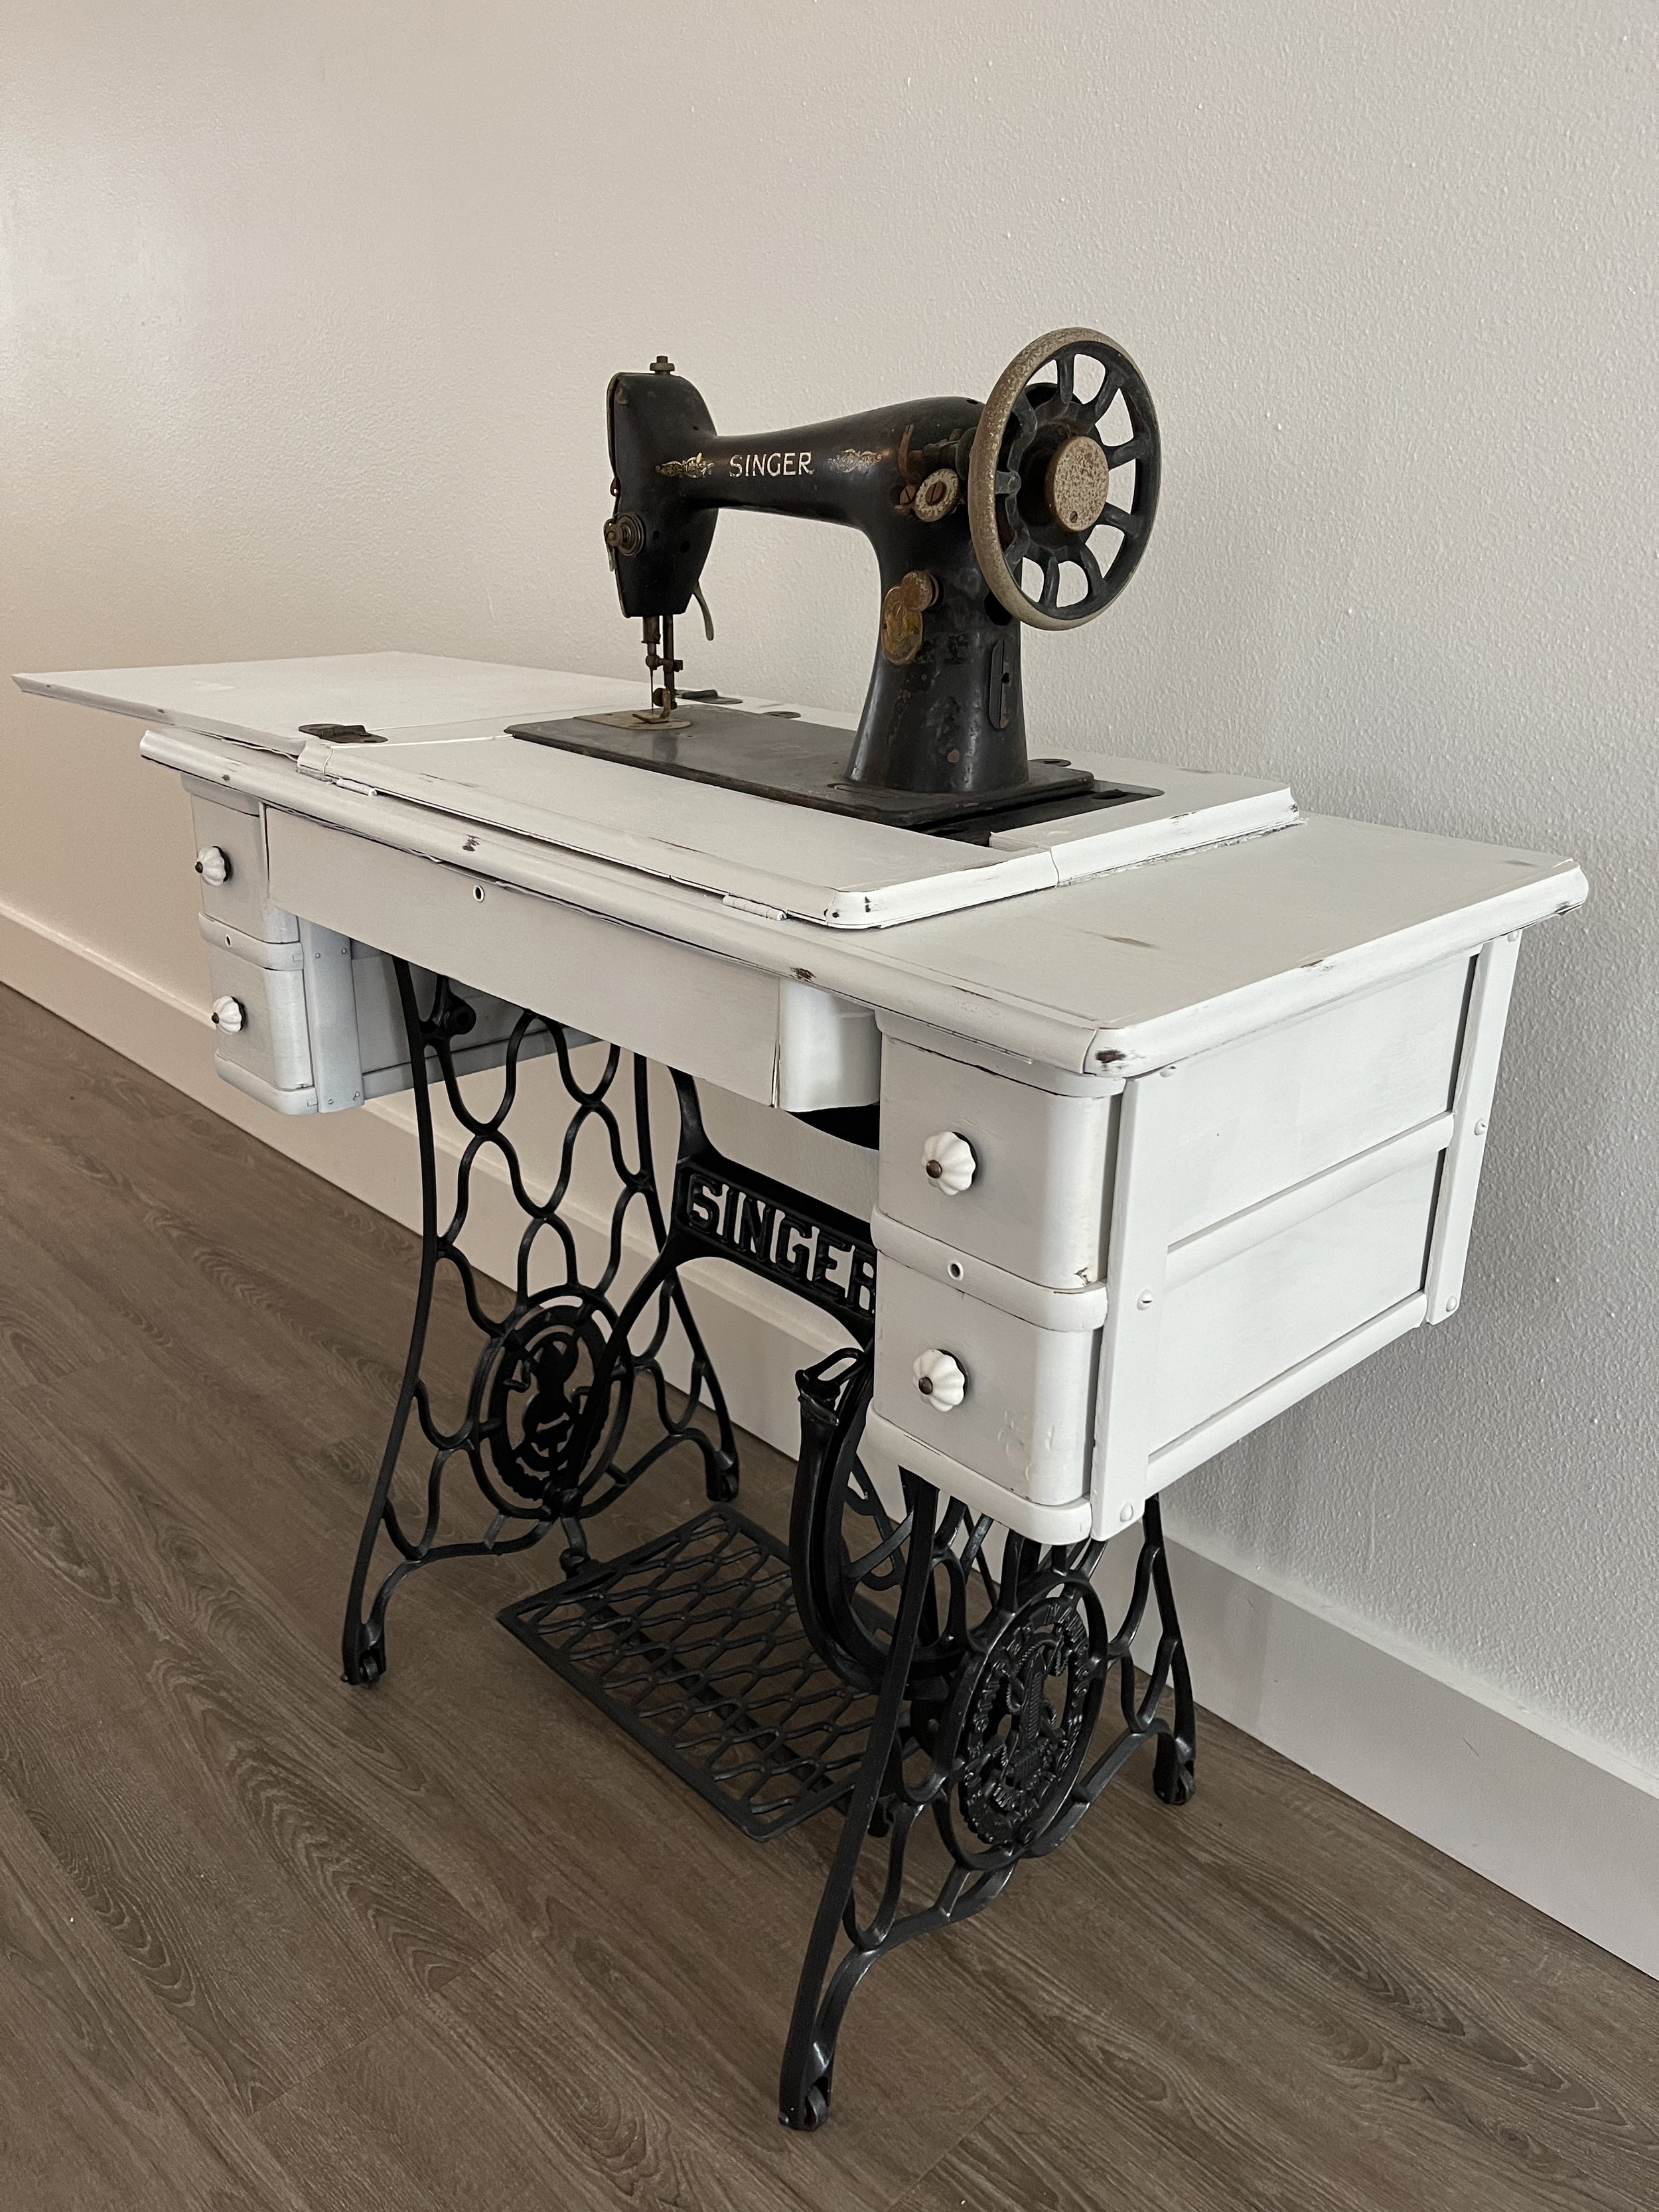 Antique Singer Sewing Machine Table Makeover — Ashley French